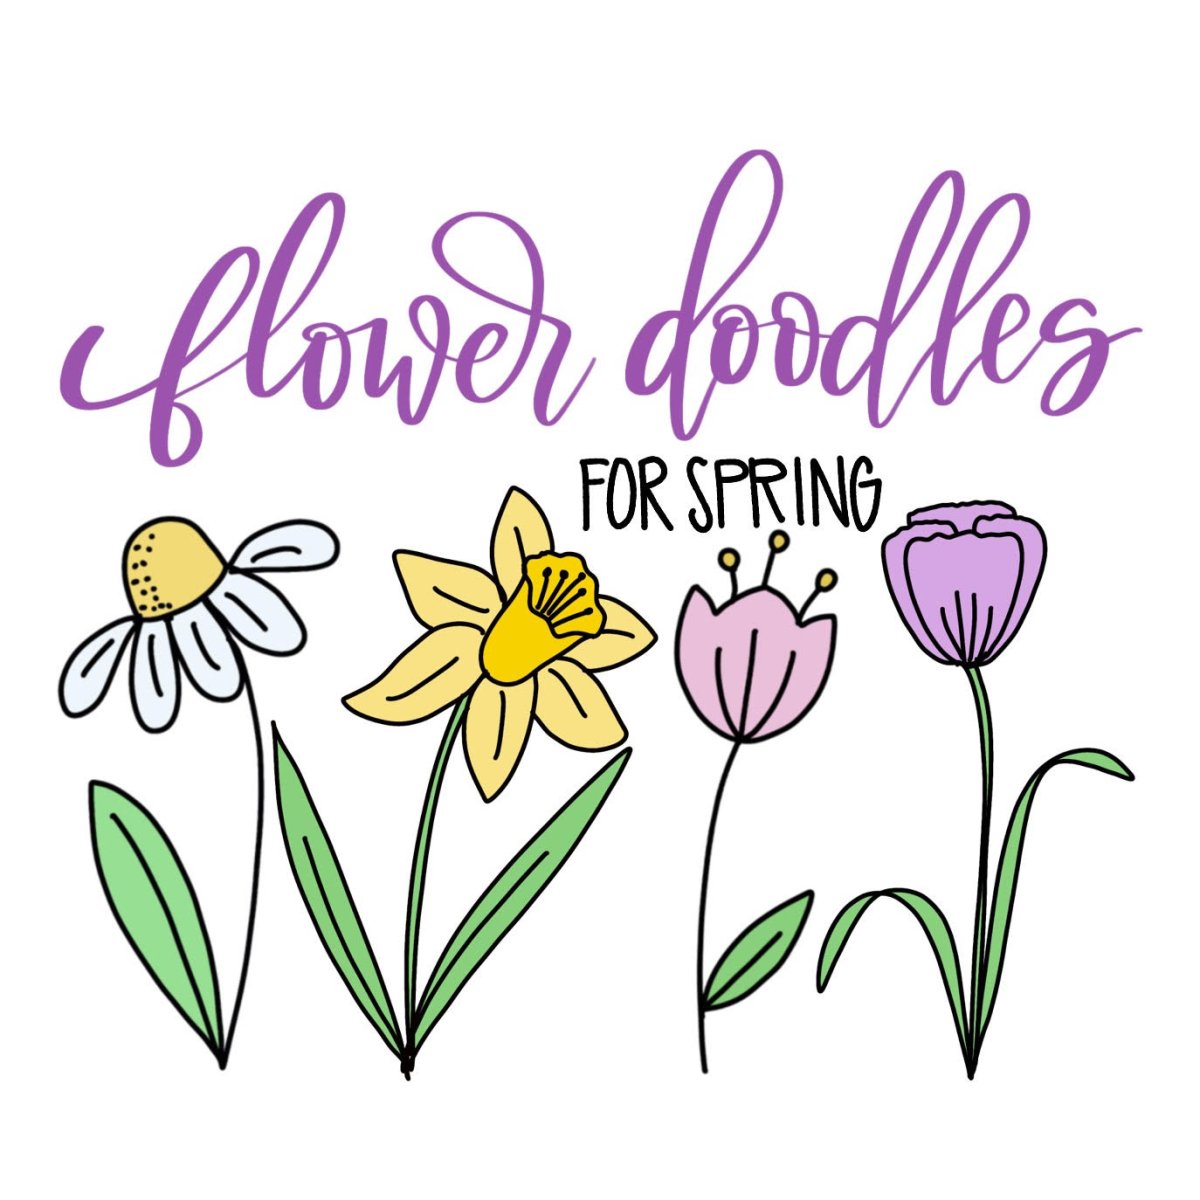 Image contains the words "flower doodles for spring" above four hand-drawn flowers.